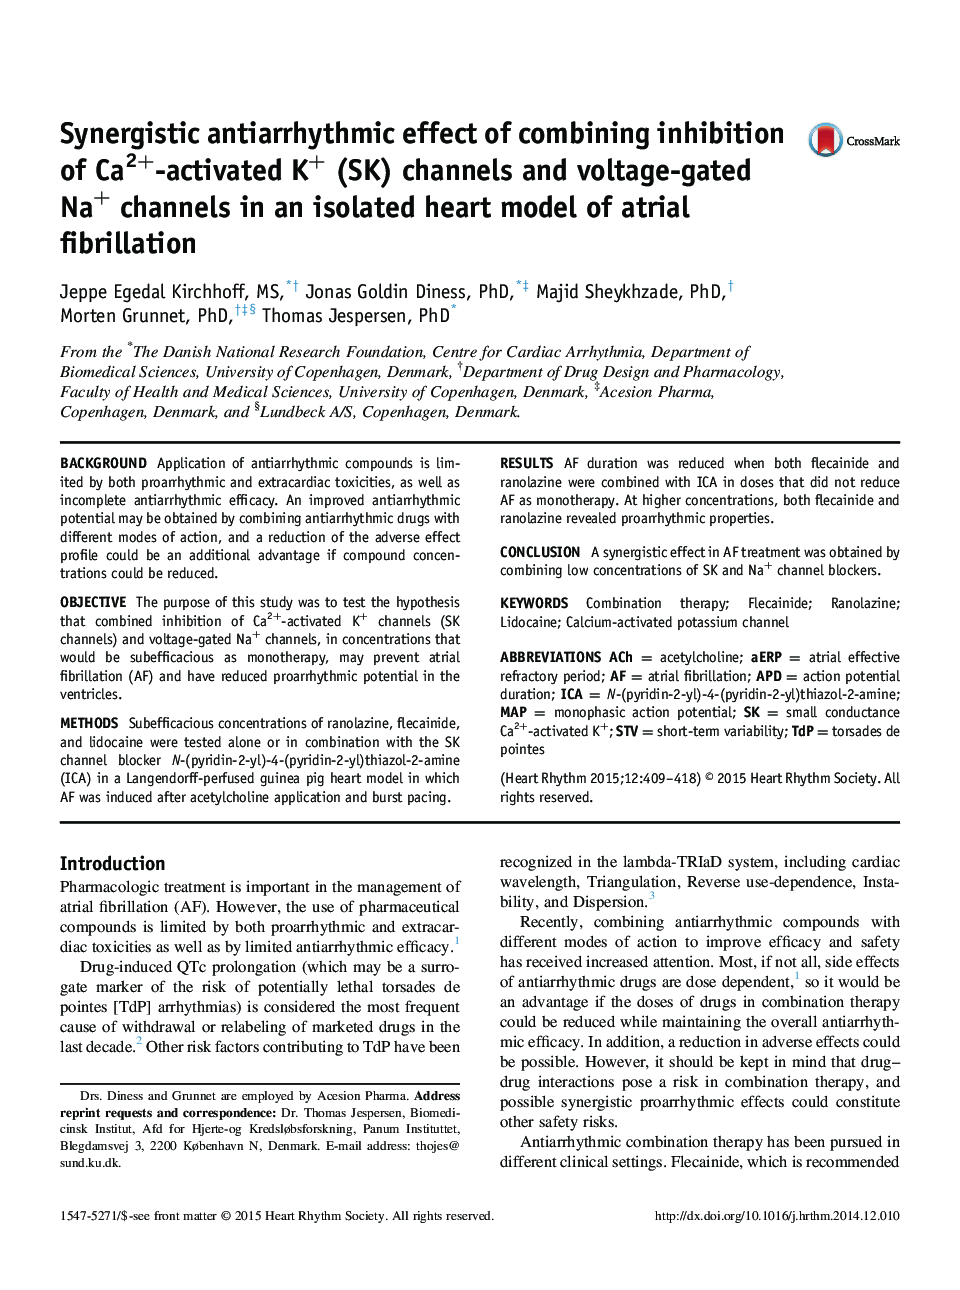 Synergistic antiarrhythmic effect of combining inhibition of Ca2+-activated K+ (SK) channels and voltage-gated Na+ channels in an isolated heart model of atrial fibrillation